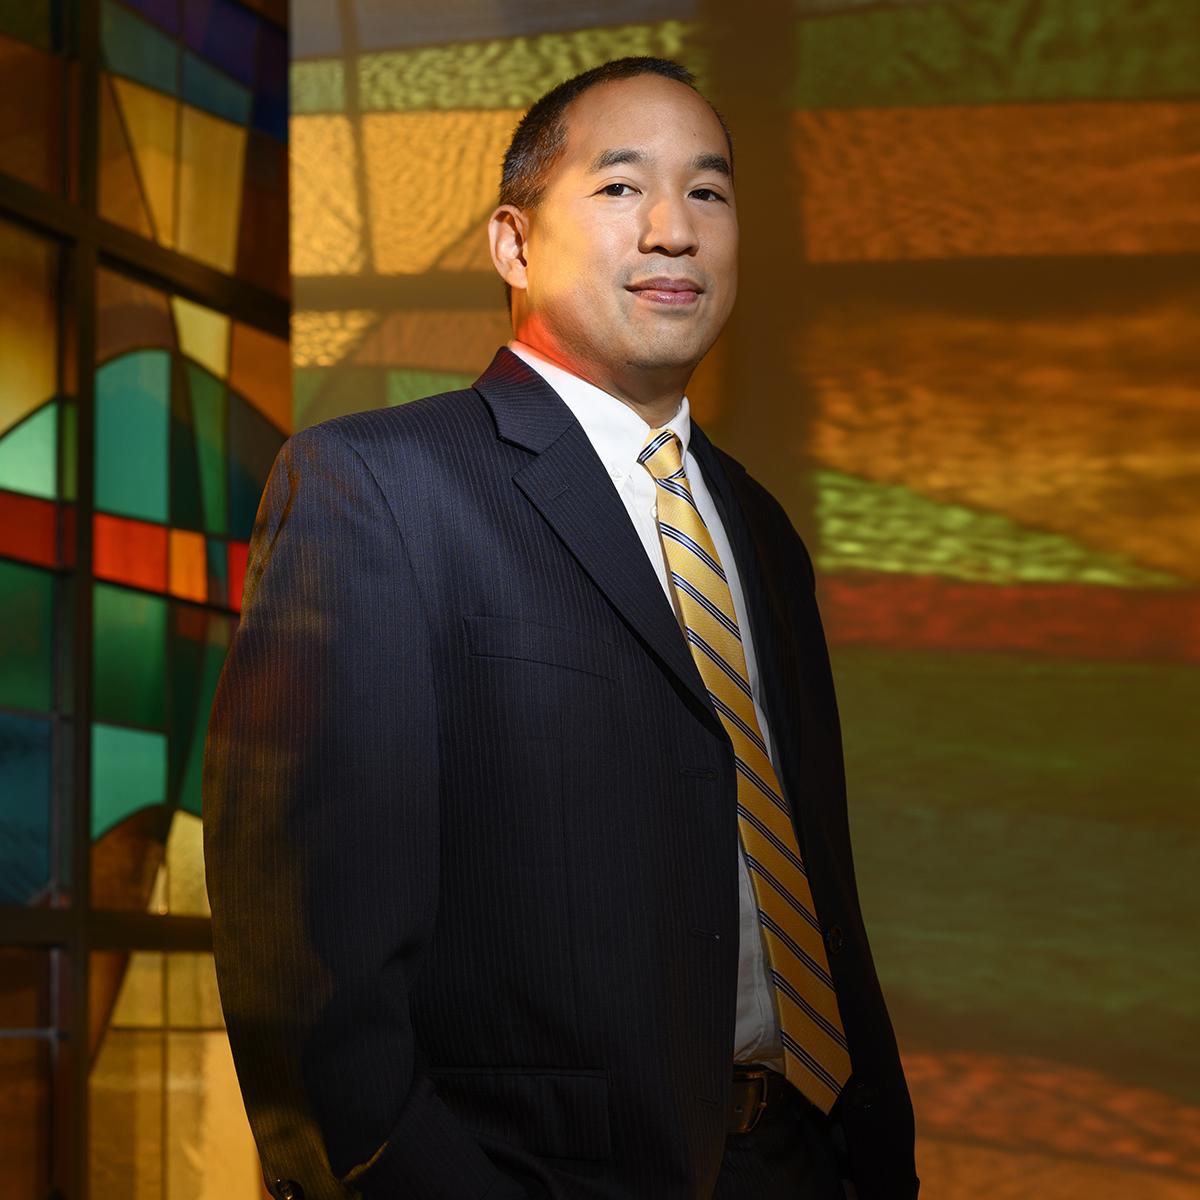 Photo of a smiling man in a suit, st和ing in front of colorful stained glass